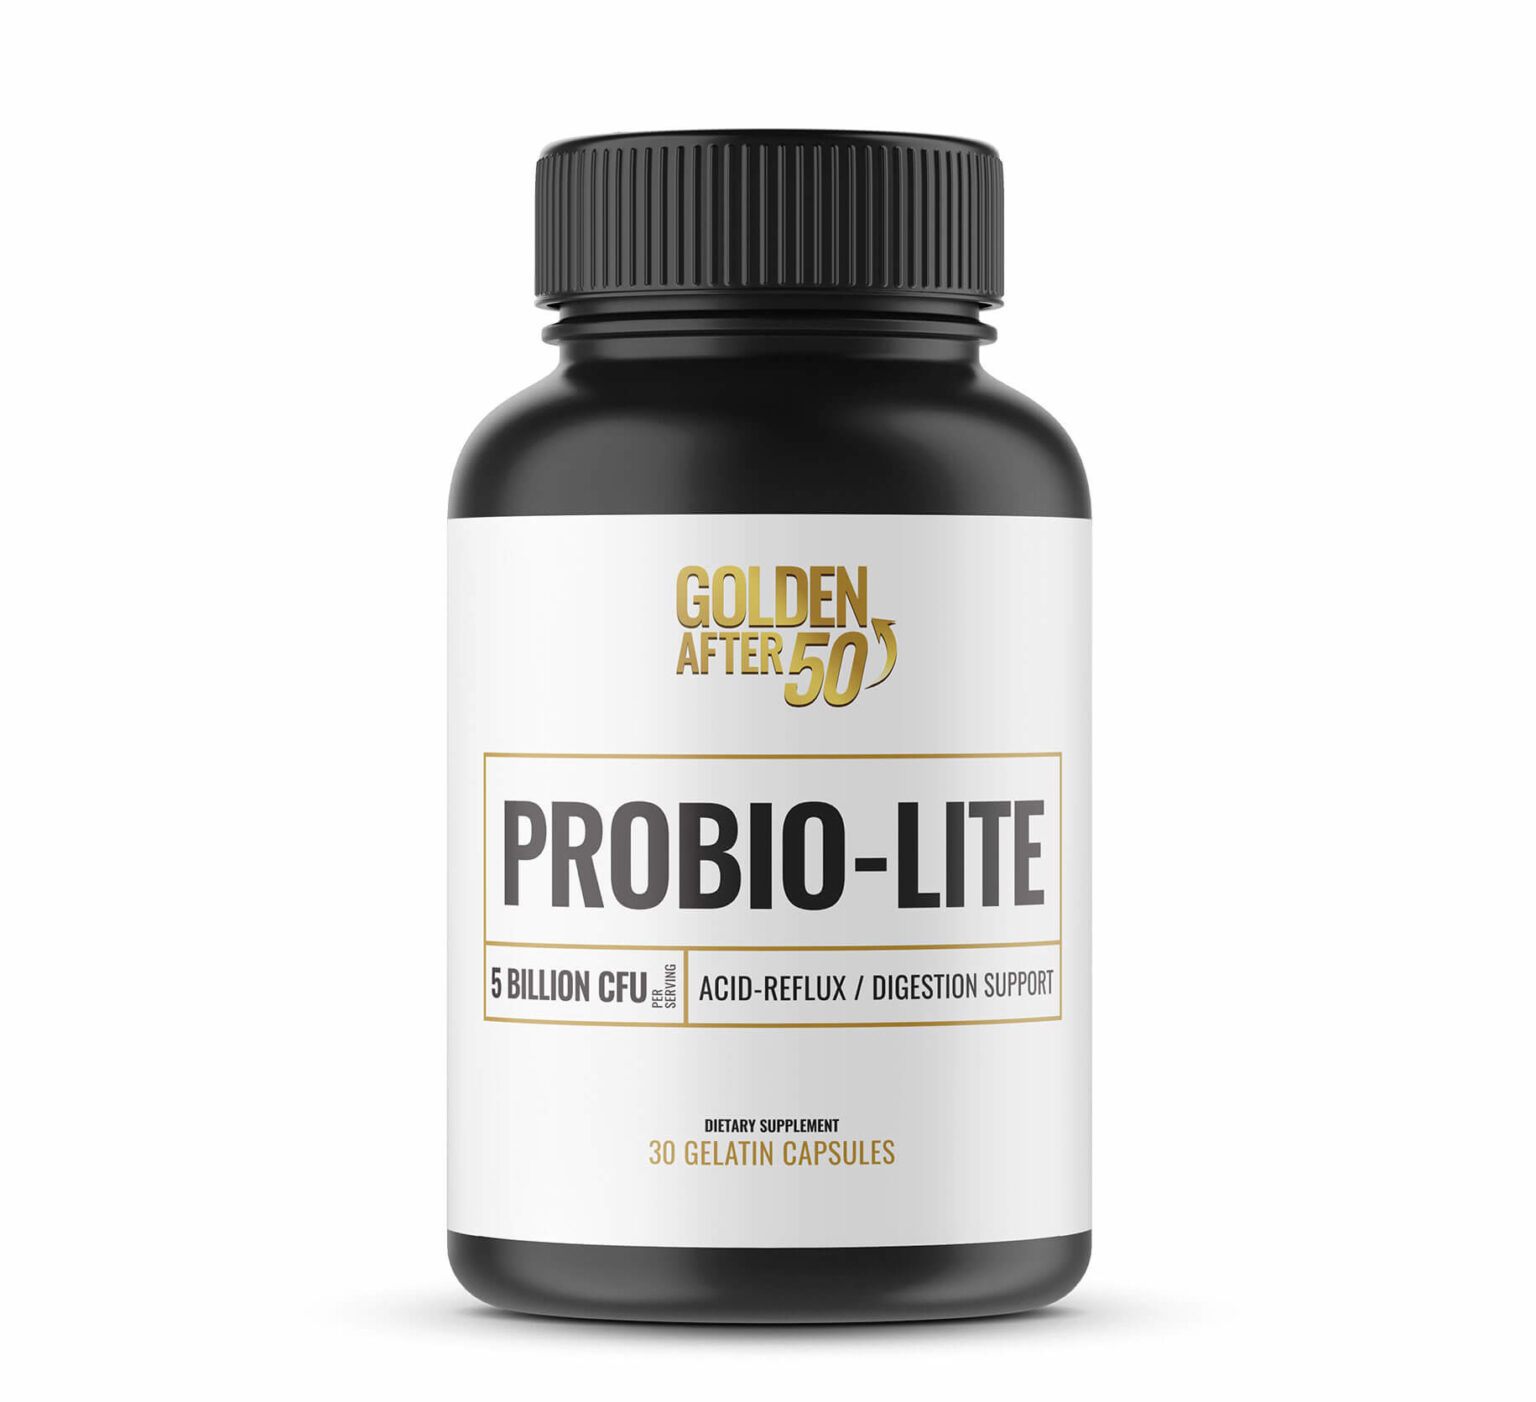 Does Probio really improve your gut health? Check out our consumer reviews now, and see what actual users have to say about the product here.